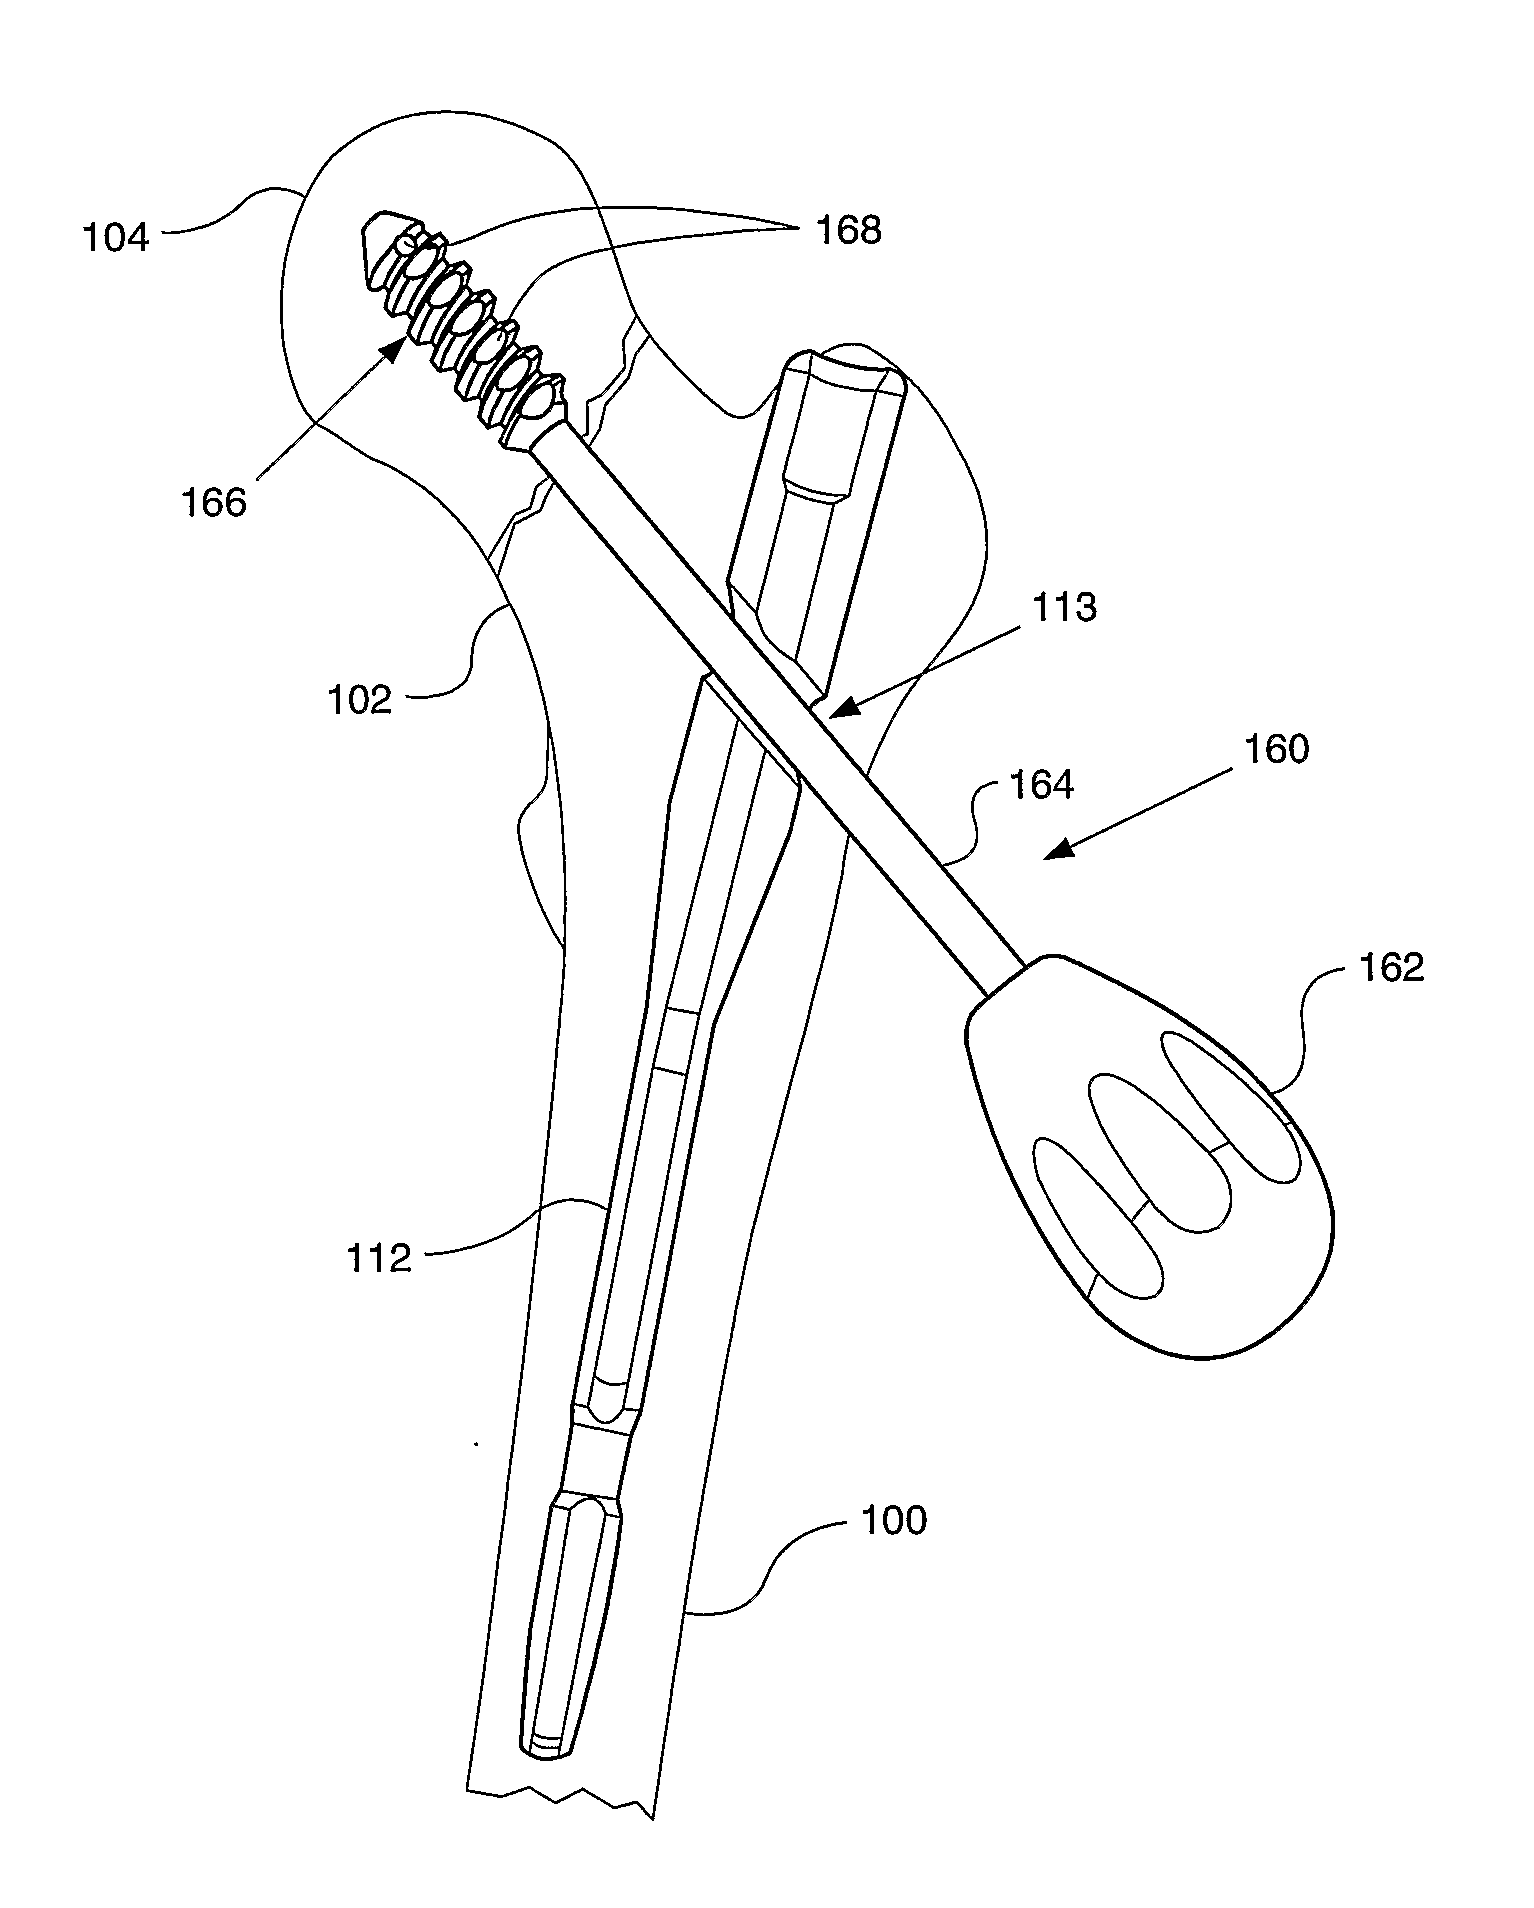 Methods and Instruments of Reducing a Fracture